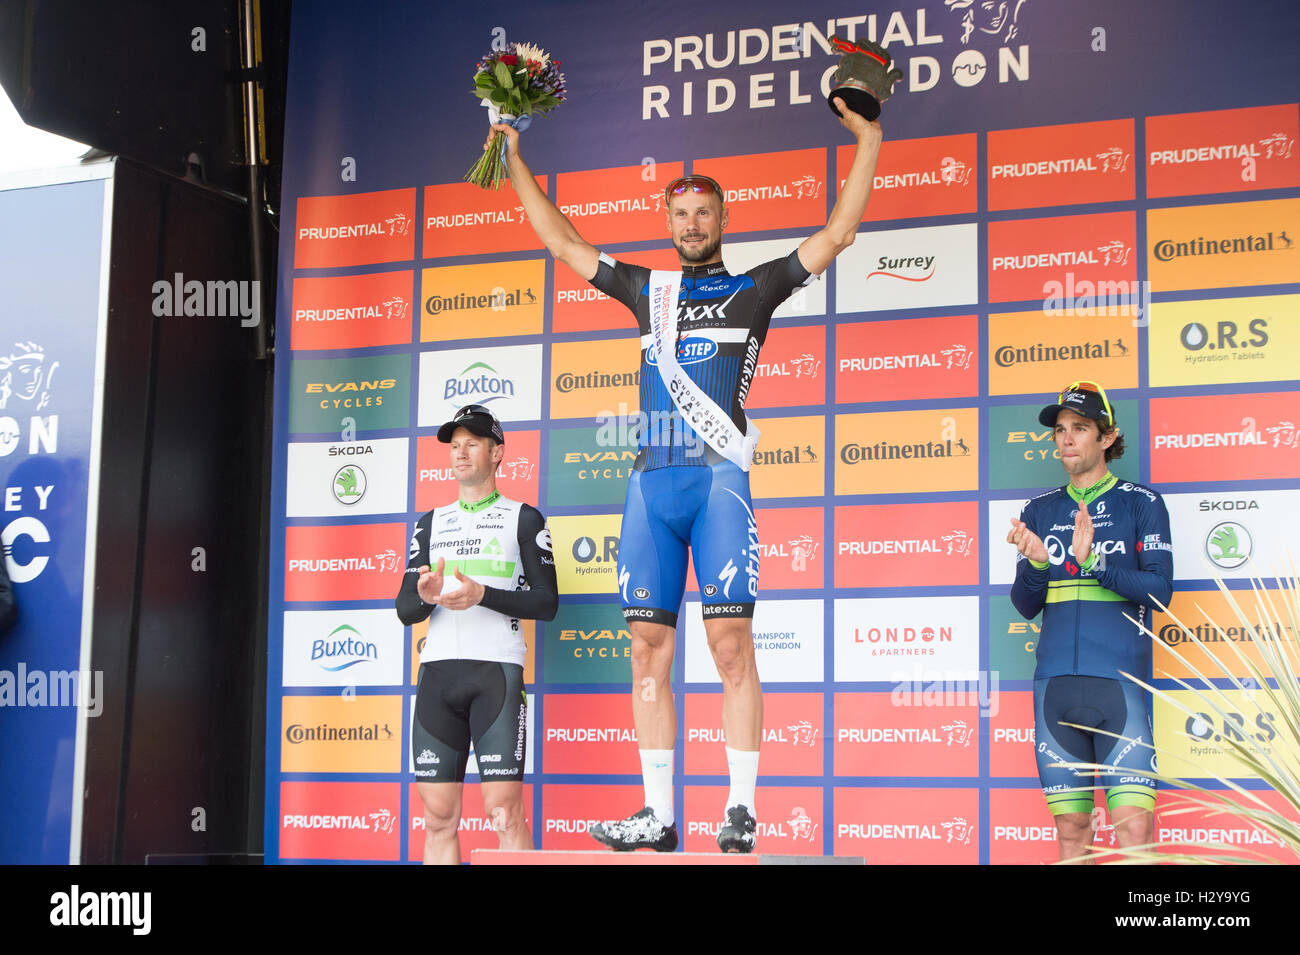 Sunday 31st July 2016 International Pro Teams compete in the RideLondon Classic Race  Featuring: Tom Boonen (Winner), Mark Renshaw (2nd Place), Michael Matthews (3rd Place) Where: London, United Kingdom When: 29 Jul 2016 Stock Photo